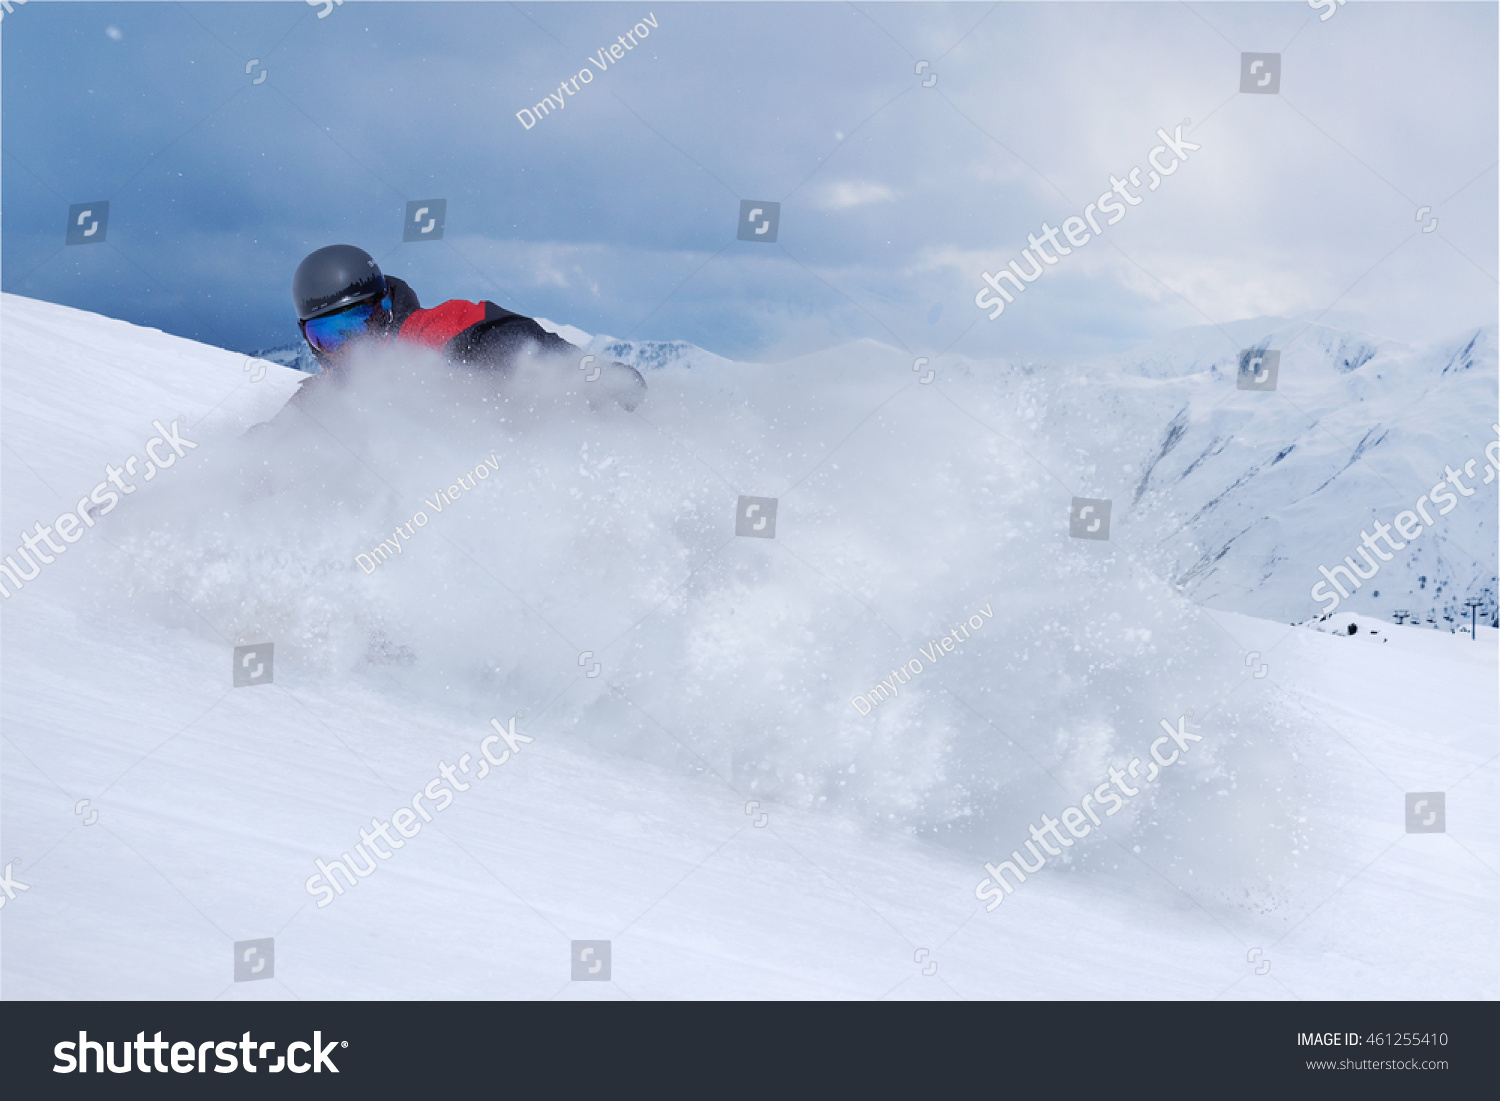 Snowboarder riding fast on a dry snow on freeride slope. #461255410